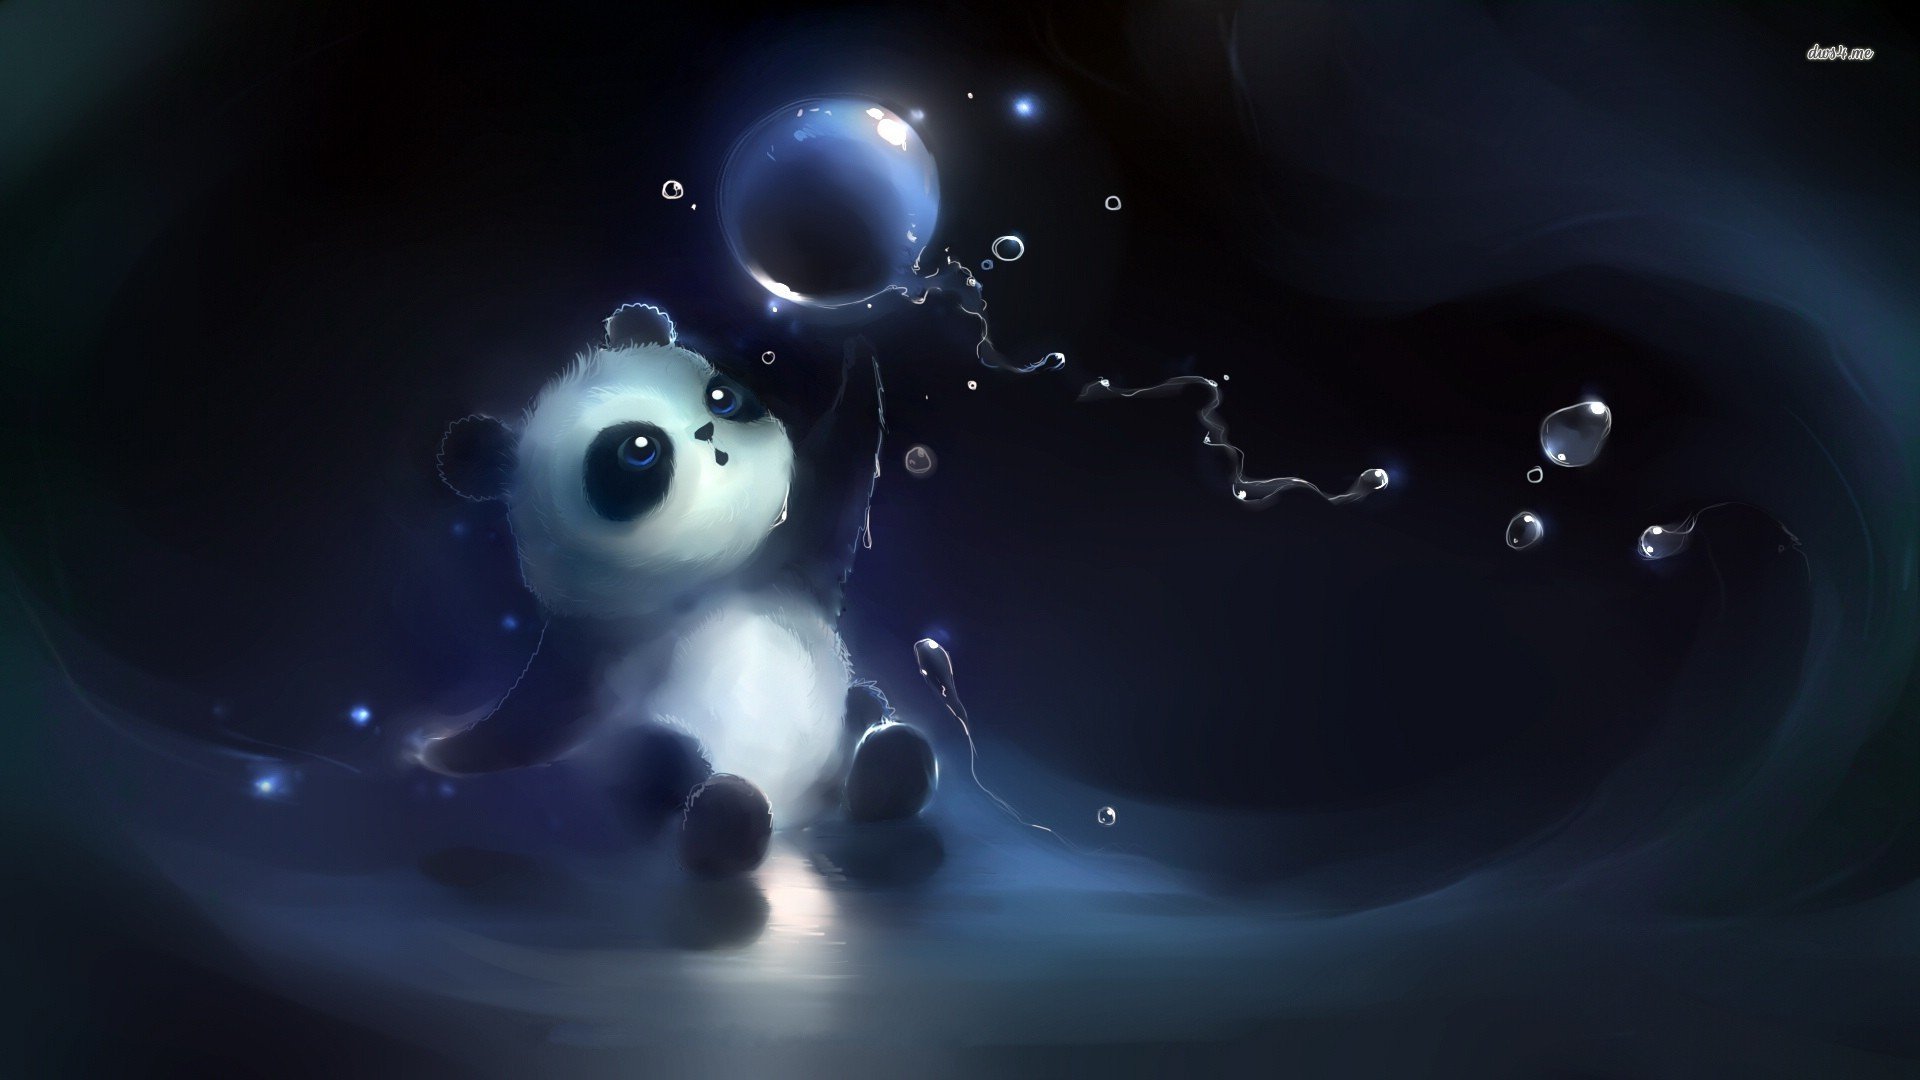 Cute Panda Playing With Bubbles Artistic Wallpaper 129781 1920x1080